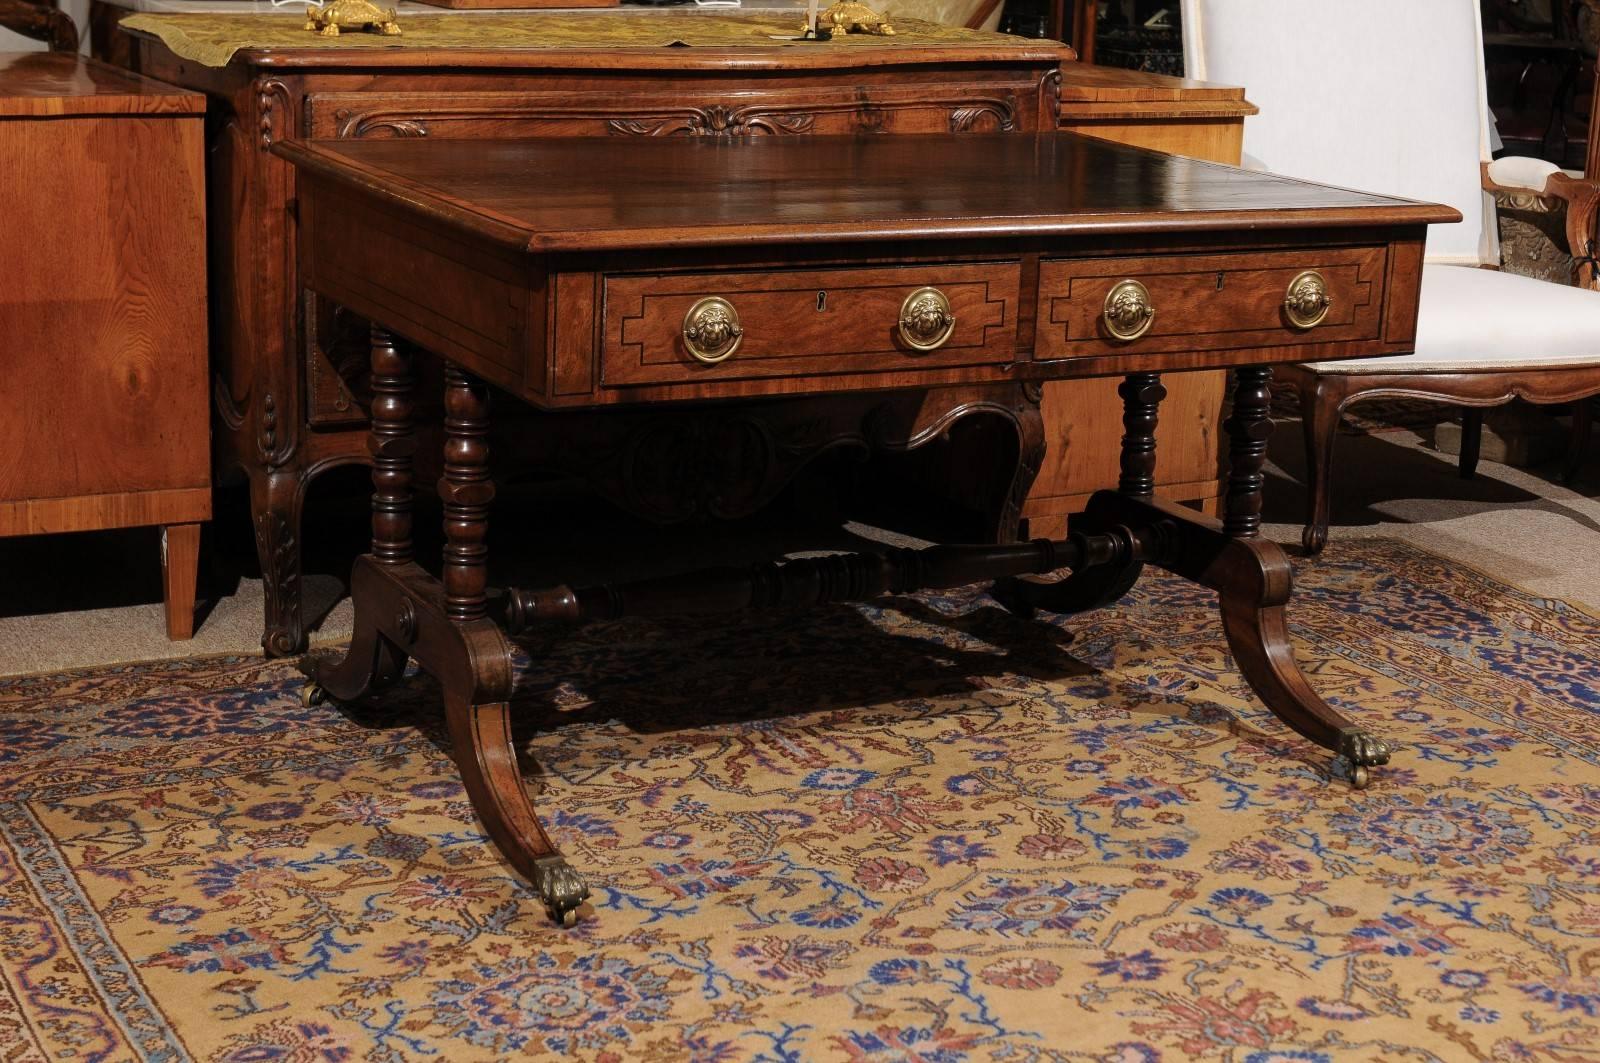 English Regency style mahogany writing table or desk with Greek key embossing on leather top, four drawers with lion head pulls, ebonized inlay, turned stretcher and splayed legs with brass paw castors. 

William Word Fine Antiques: Atlanta's